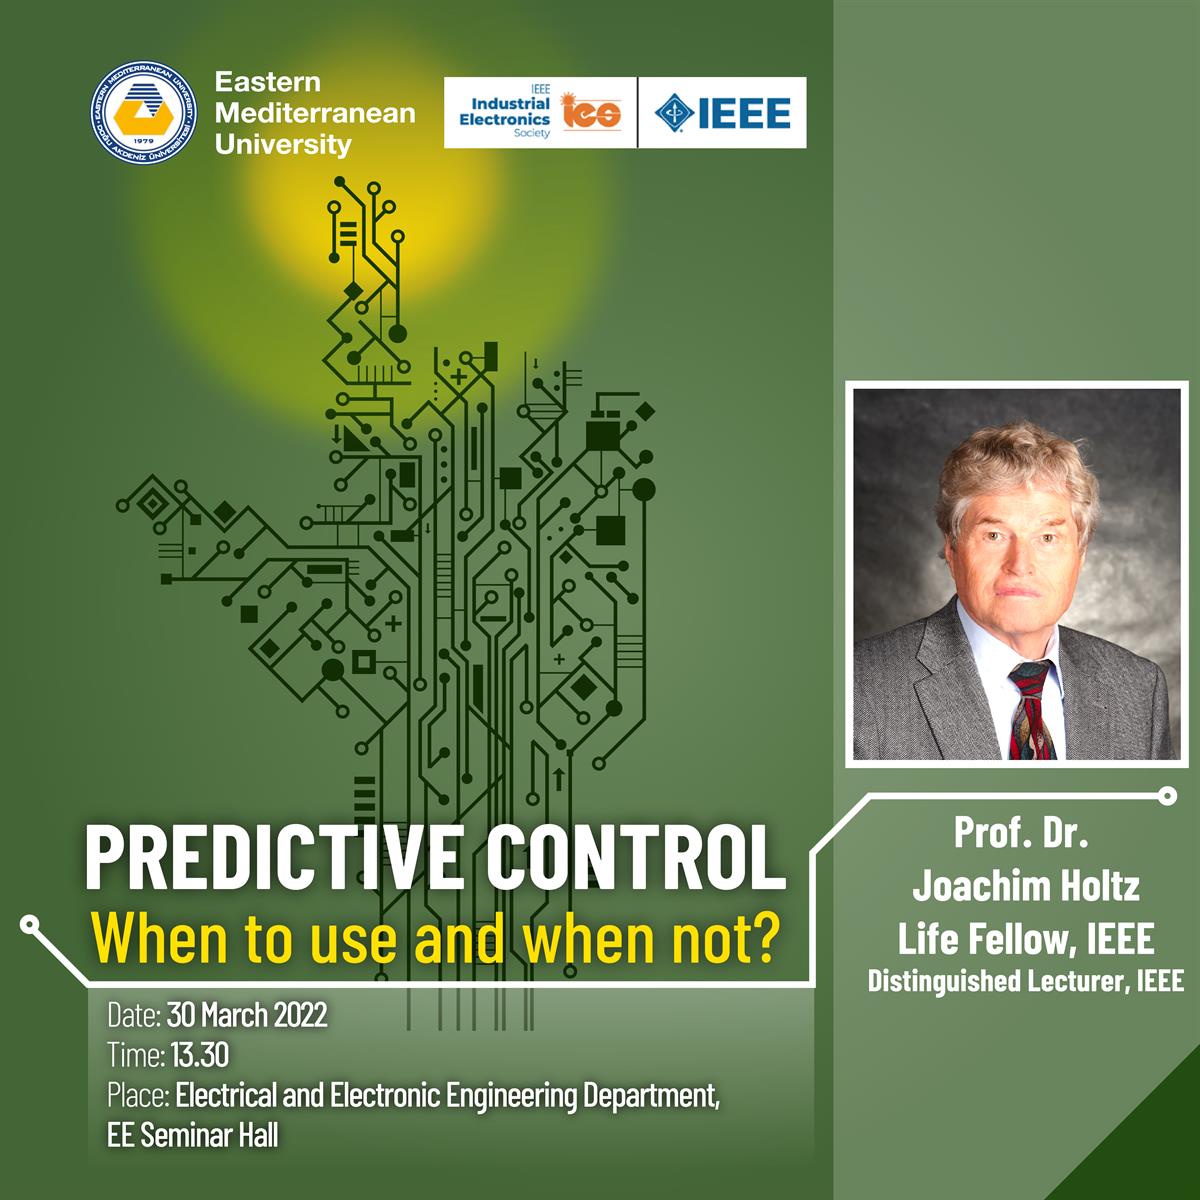 Seminar: Predictive Control - When to use and when not? by Prof. Dr. Joachim Holtz